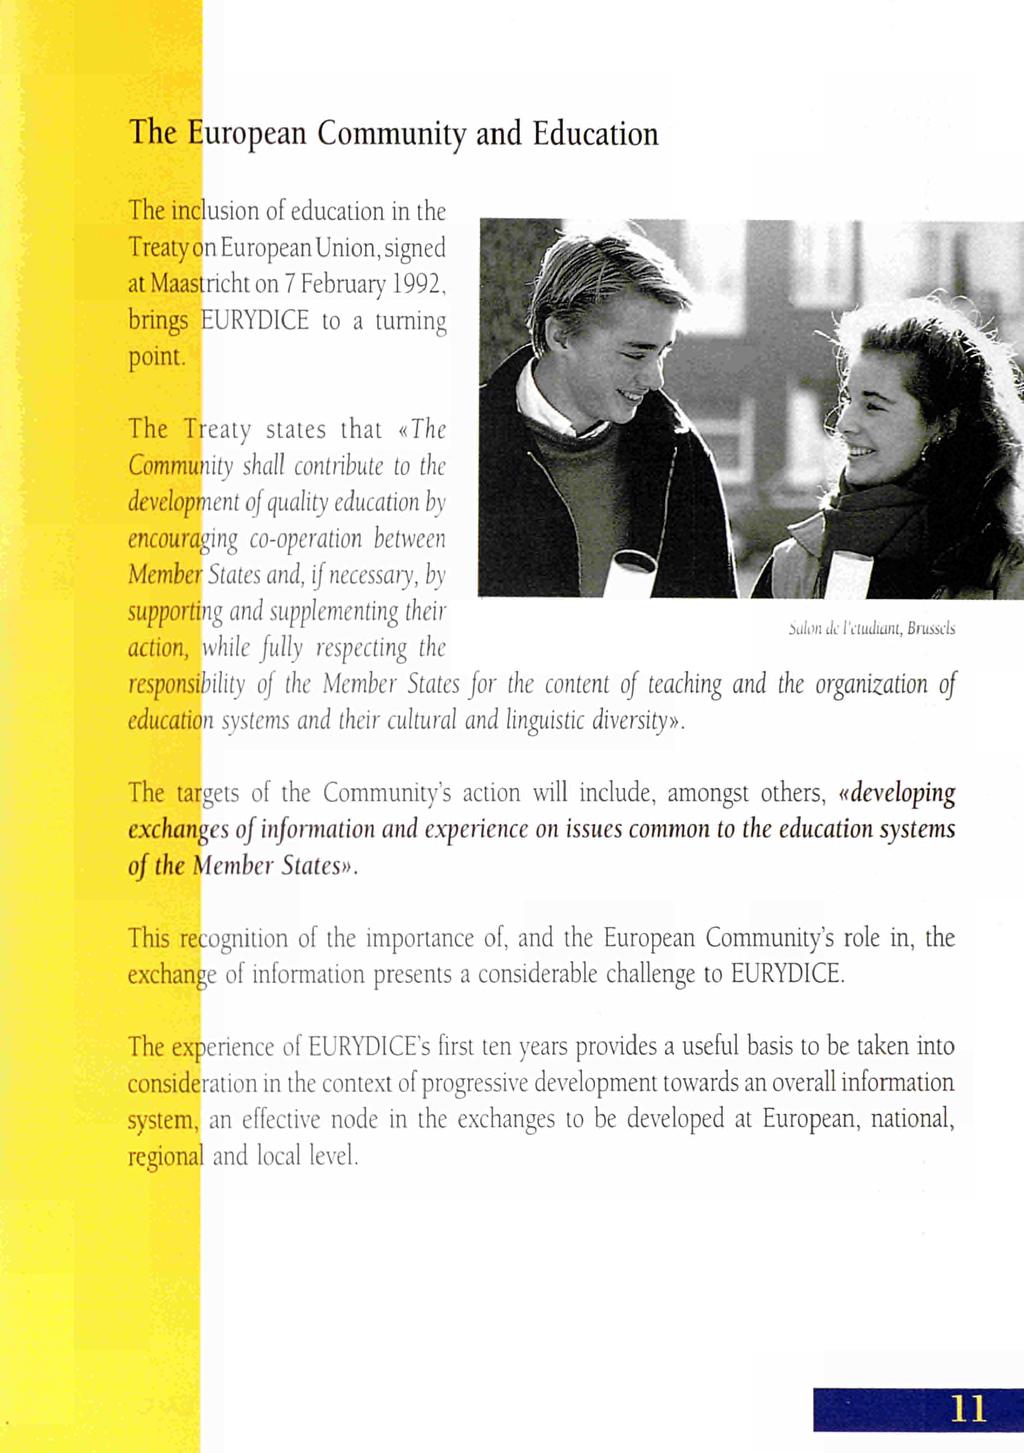 The European Community and Education The inclusion of education in the Treaty on EuropeanUnion, signed at Maastricht on 7 February 1992, brings EURYDICE to a turning point.